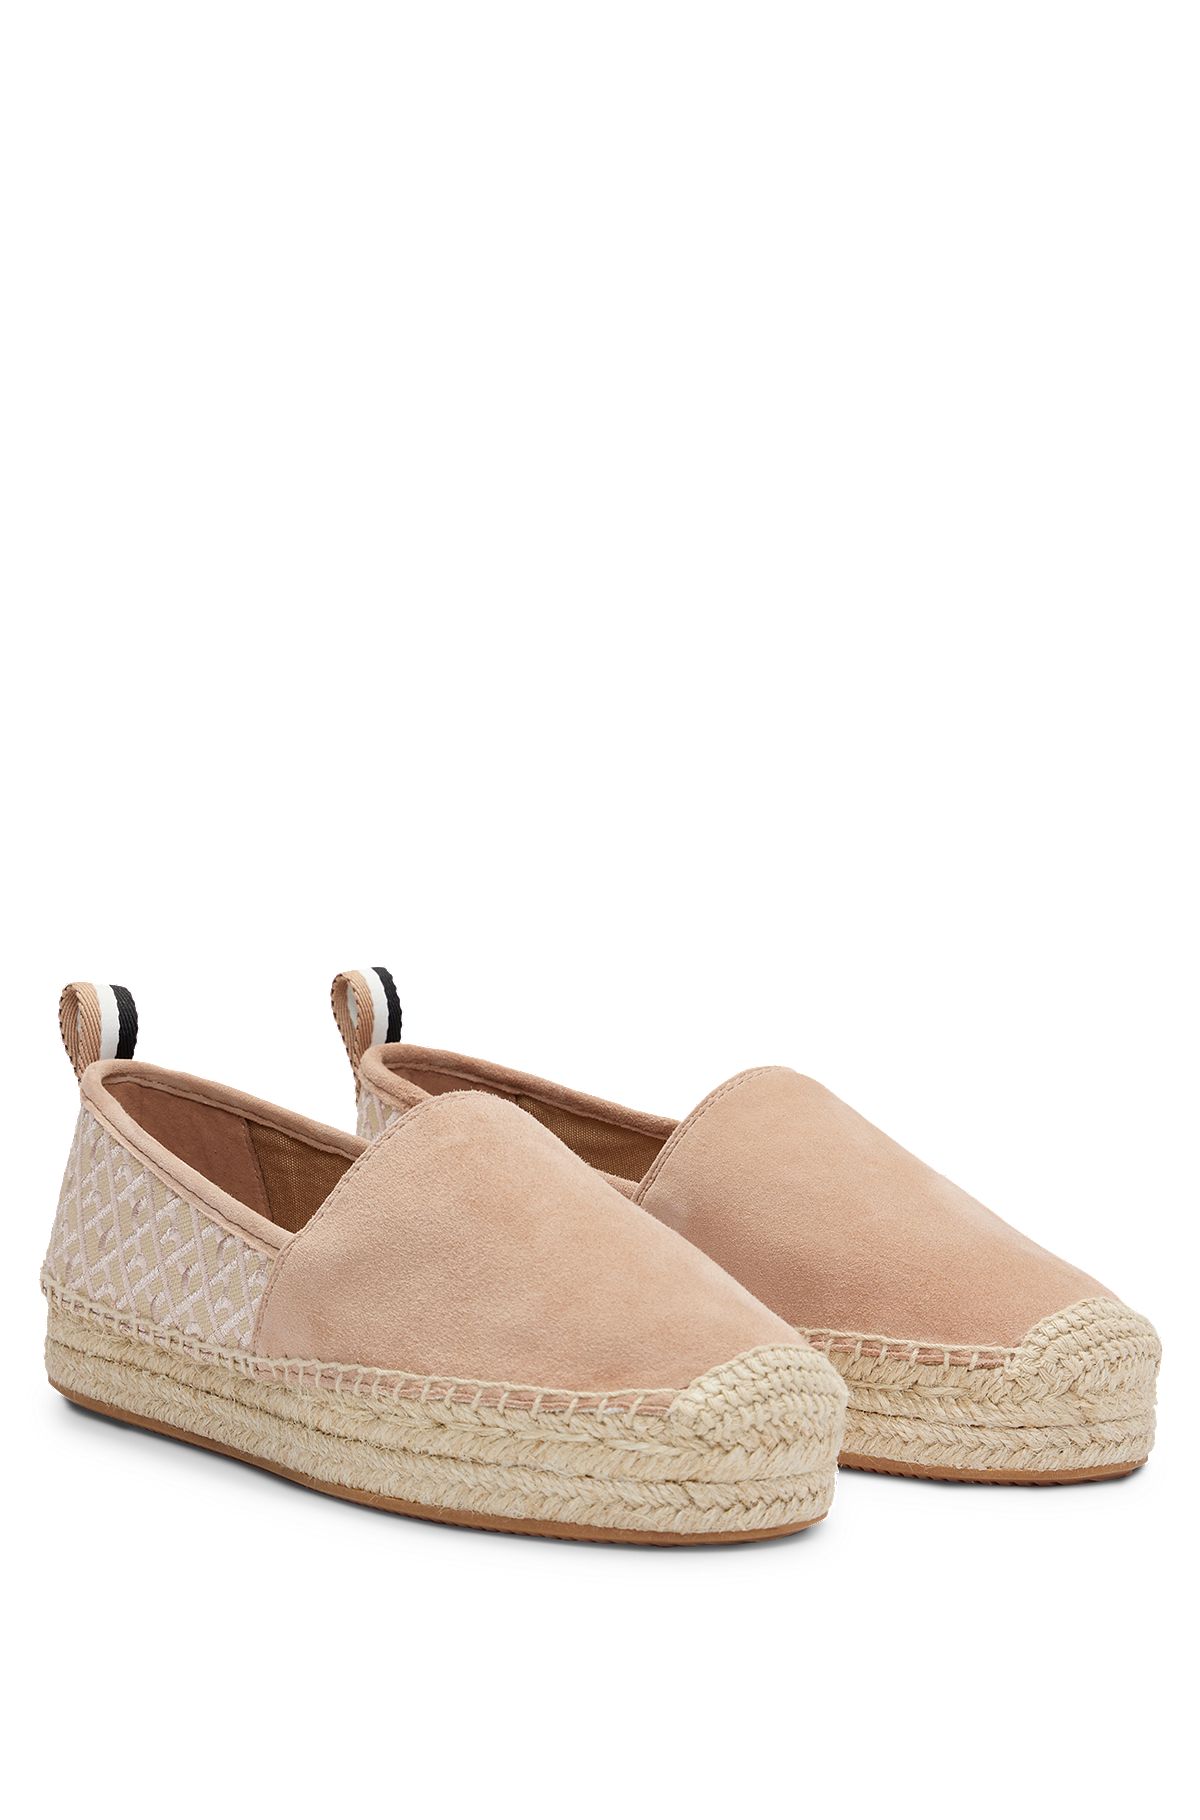 Suede slip-on espadrilles with embroidered monograms, Light Beige